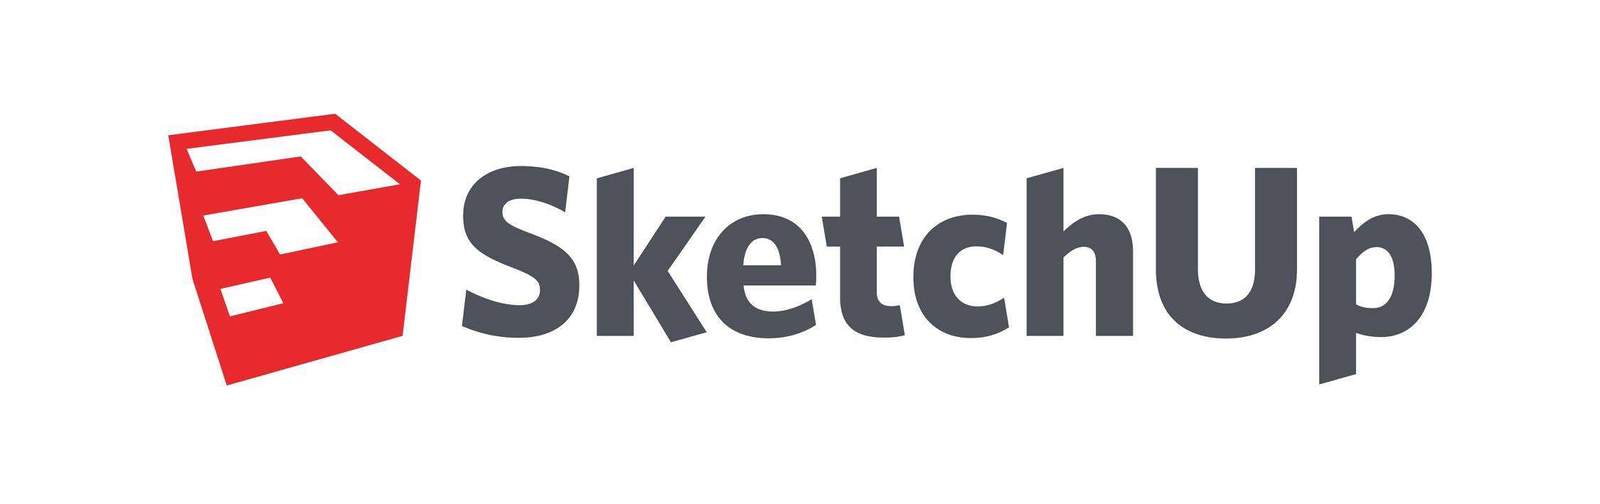 Tips to enhance the skills of an architect in the use of SketchUp